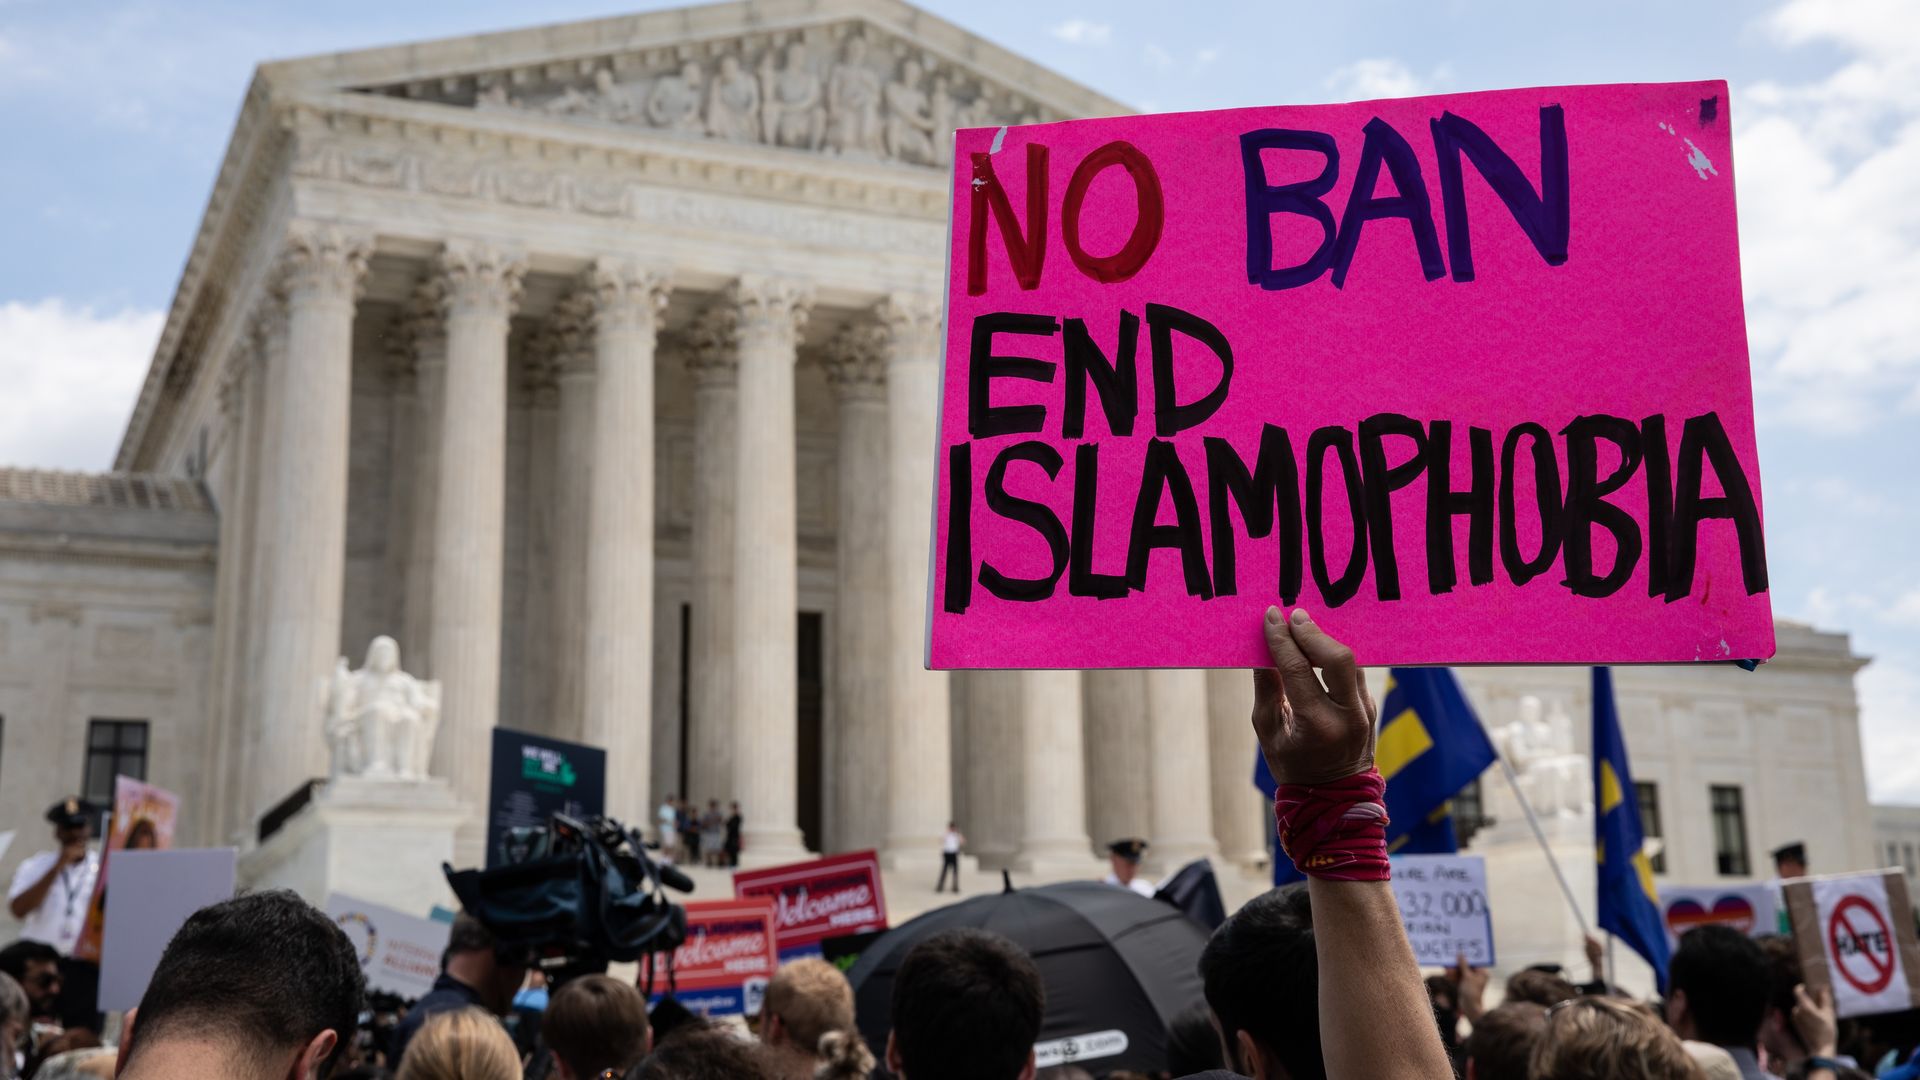 Photo of an arm raising a pink sign that says "No ban end Islamophobia" at a protest outside the Supreme Court